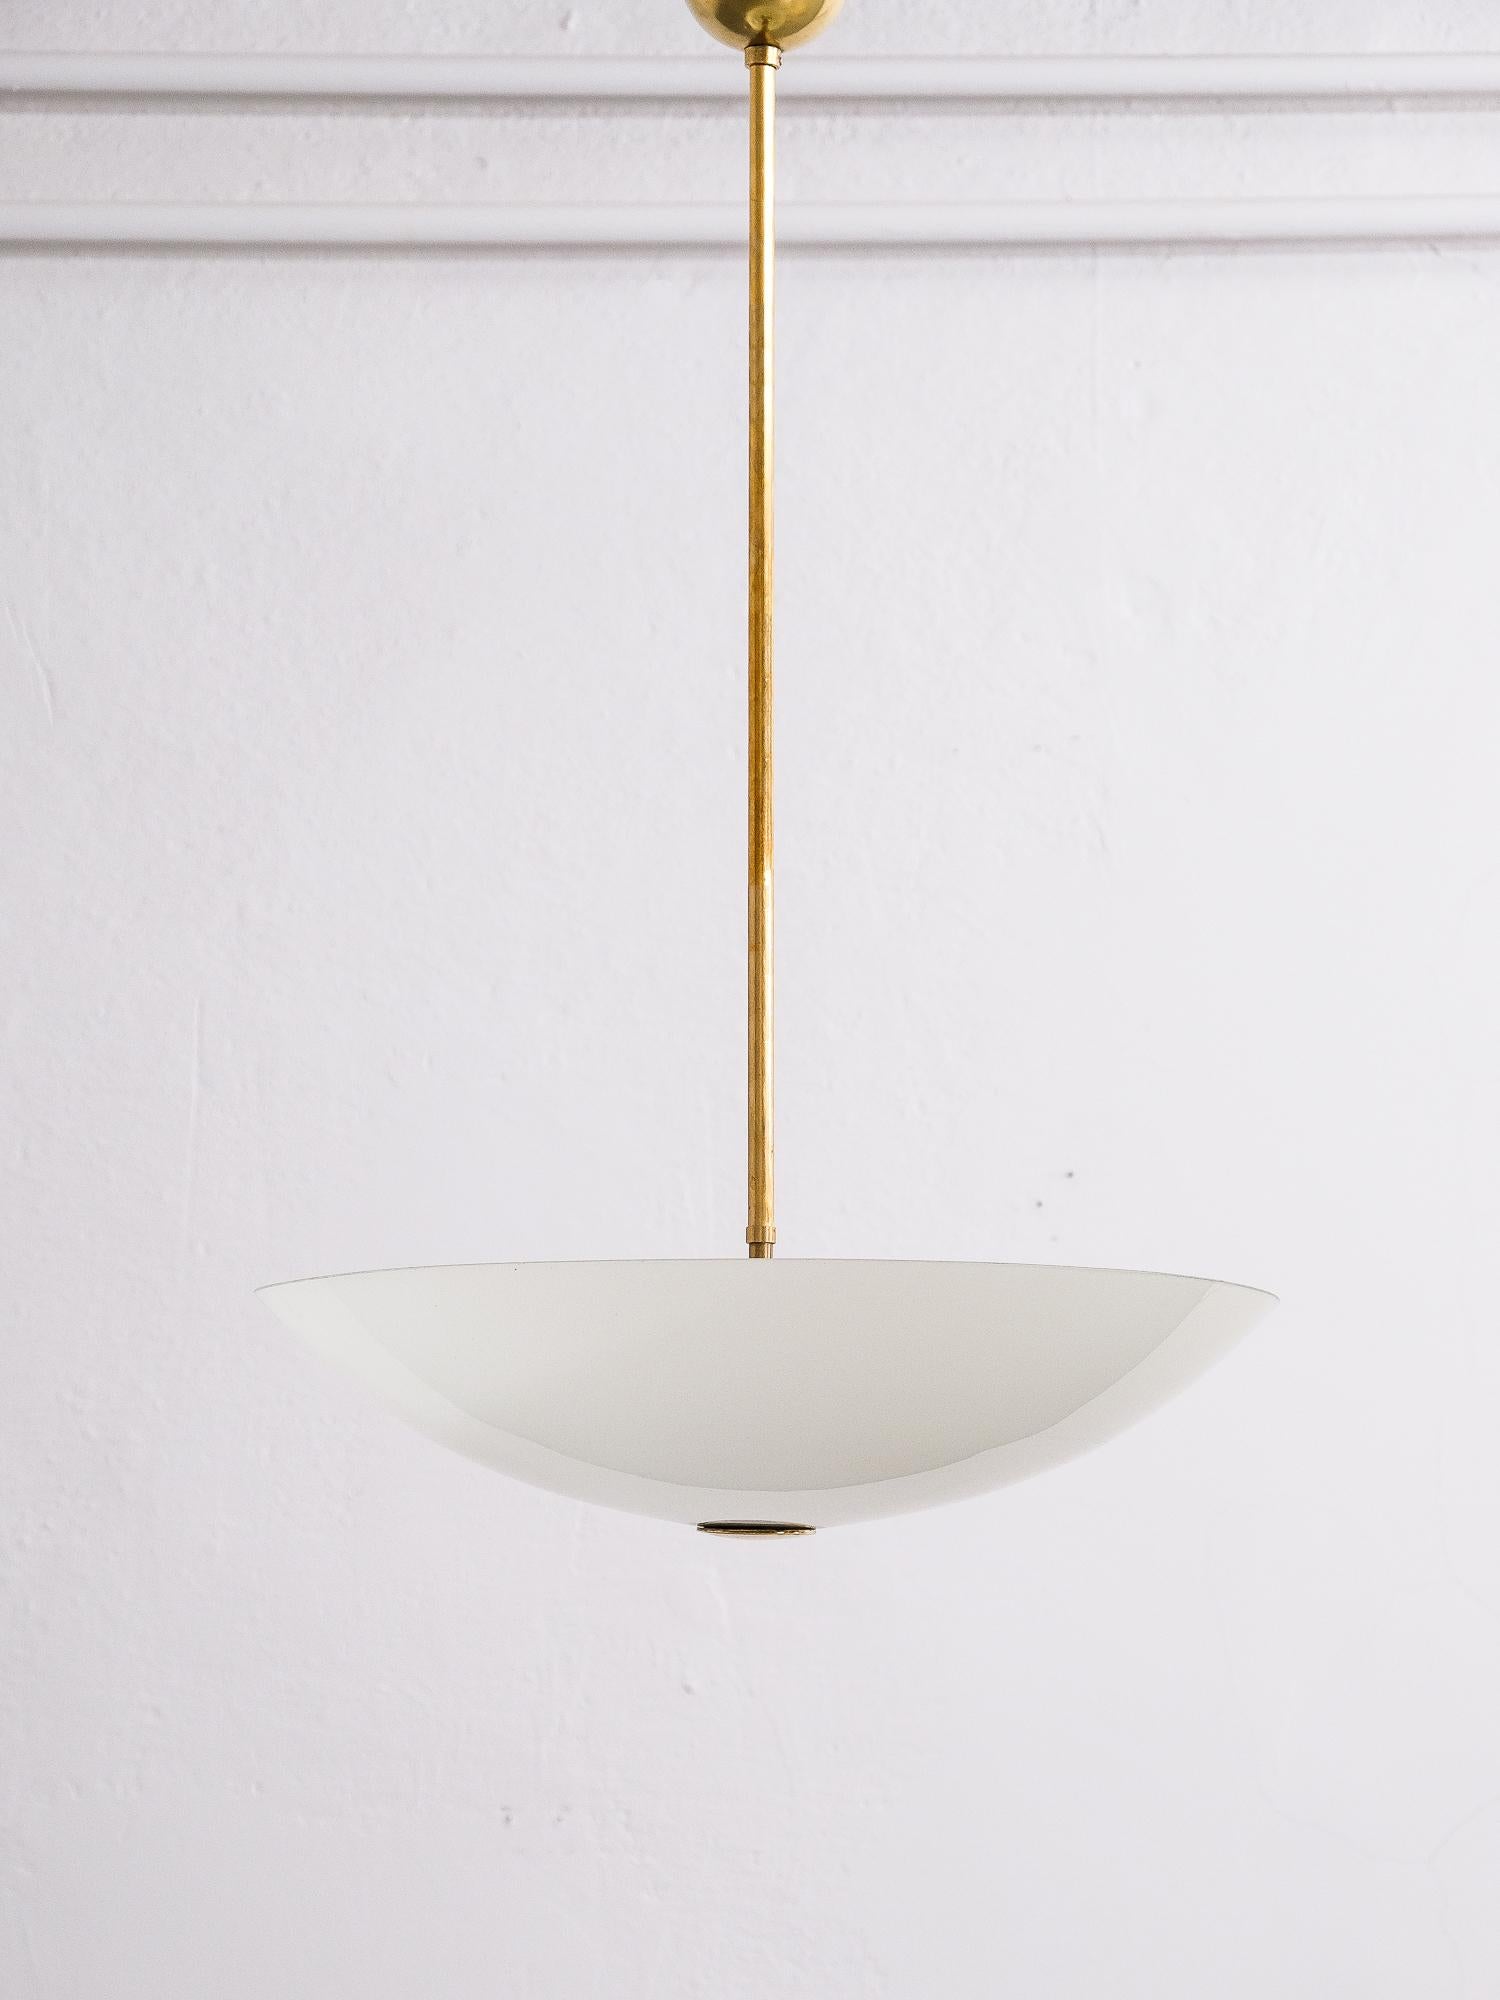 The lamp hangs from a brass stem and has three light bulbs and opaline glass shade.

Not stamped, possibly designed by Paavo Tynell for Idman/Taito Oy.